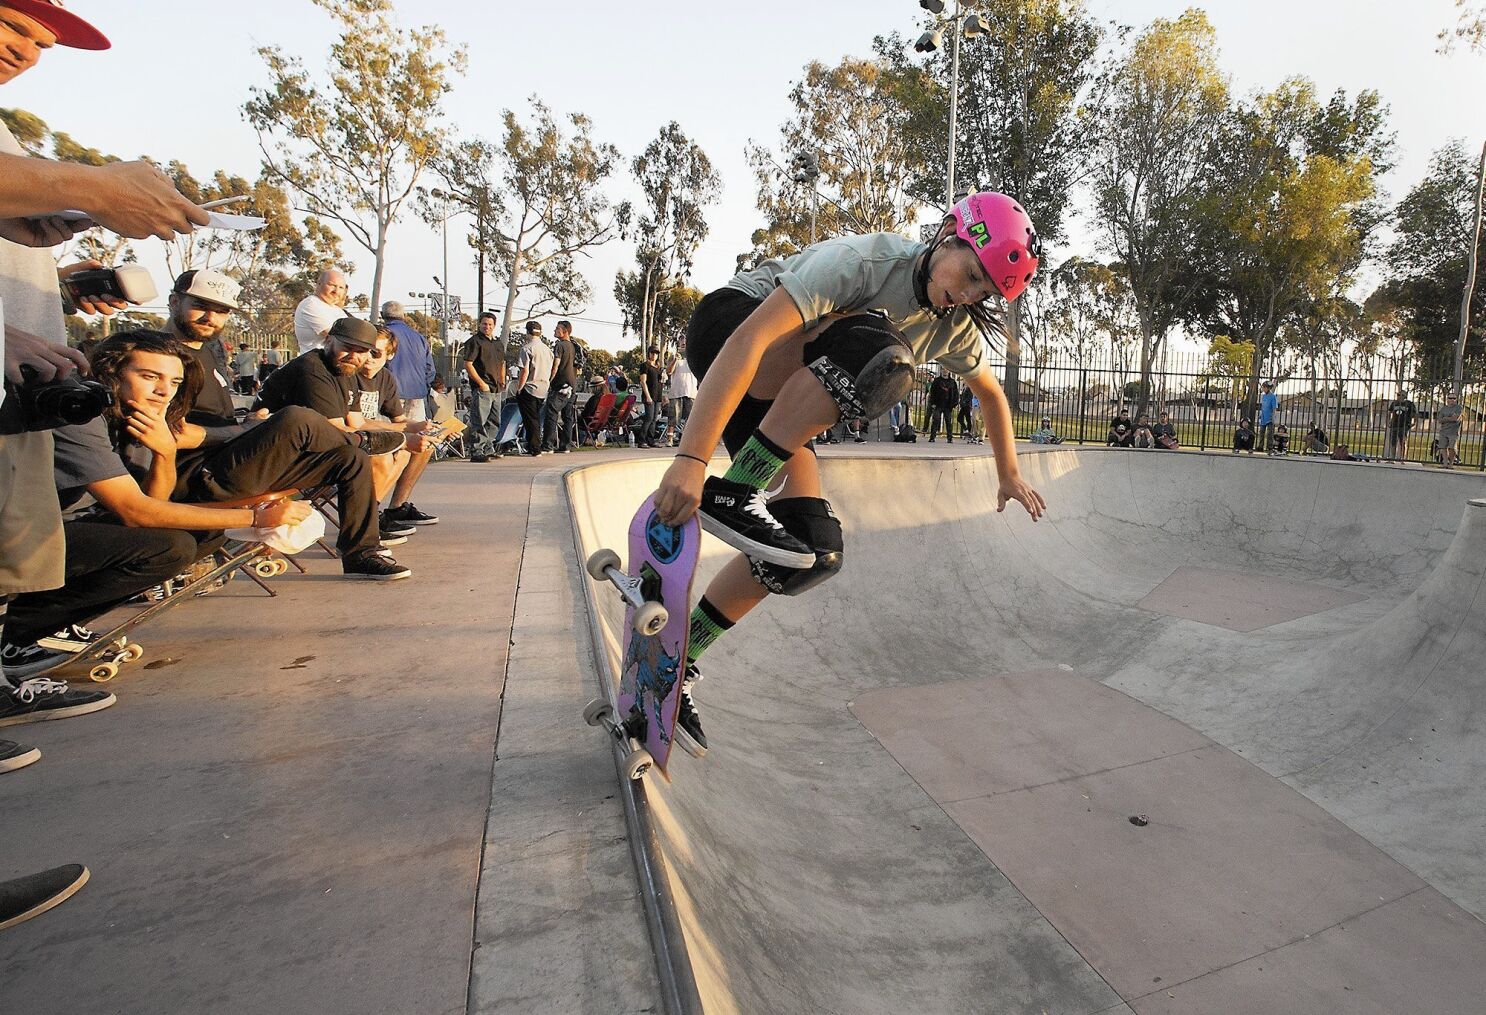 Skaters city's to reopen Costa Mesa skate park - Los Angeles